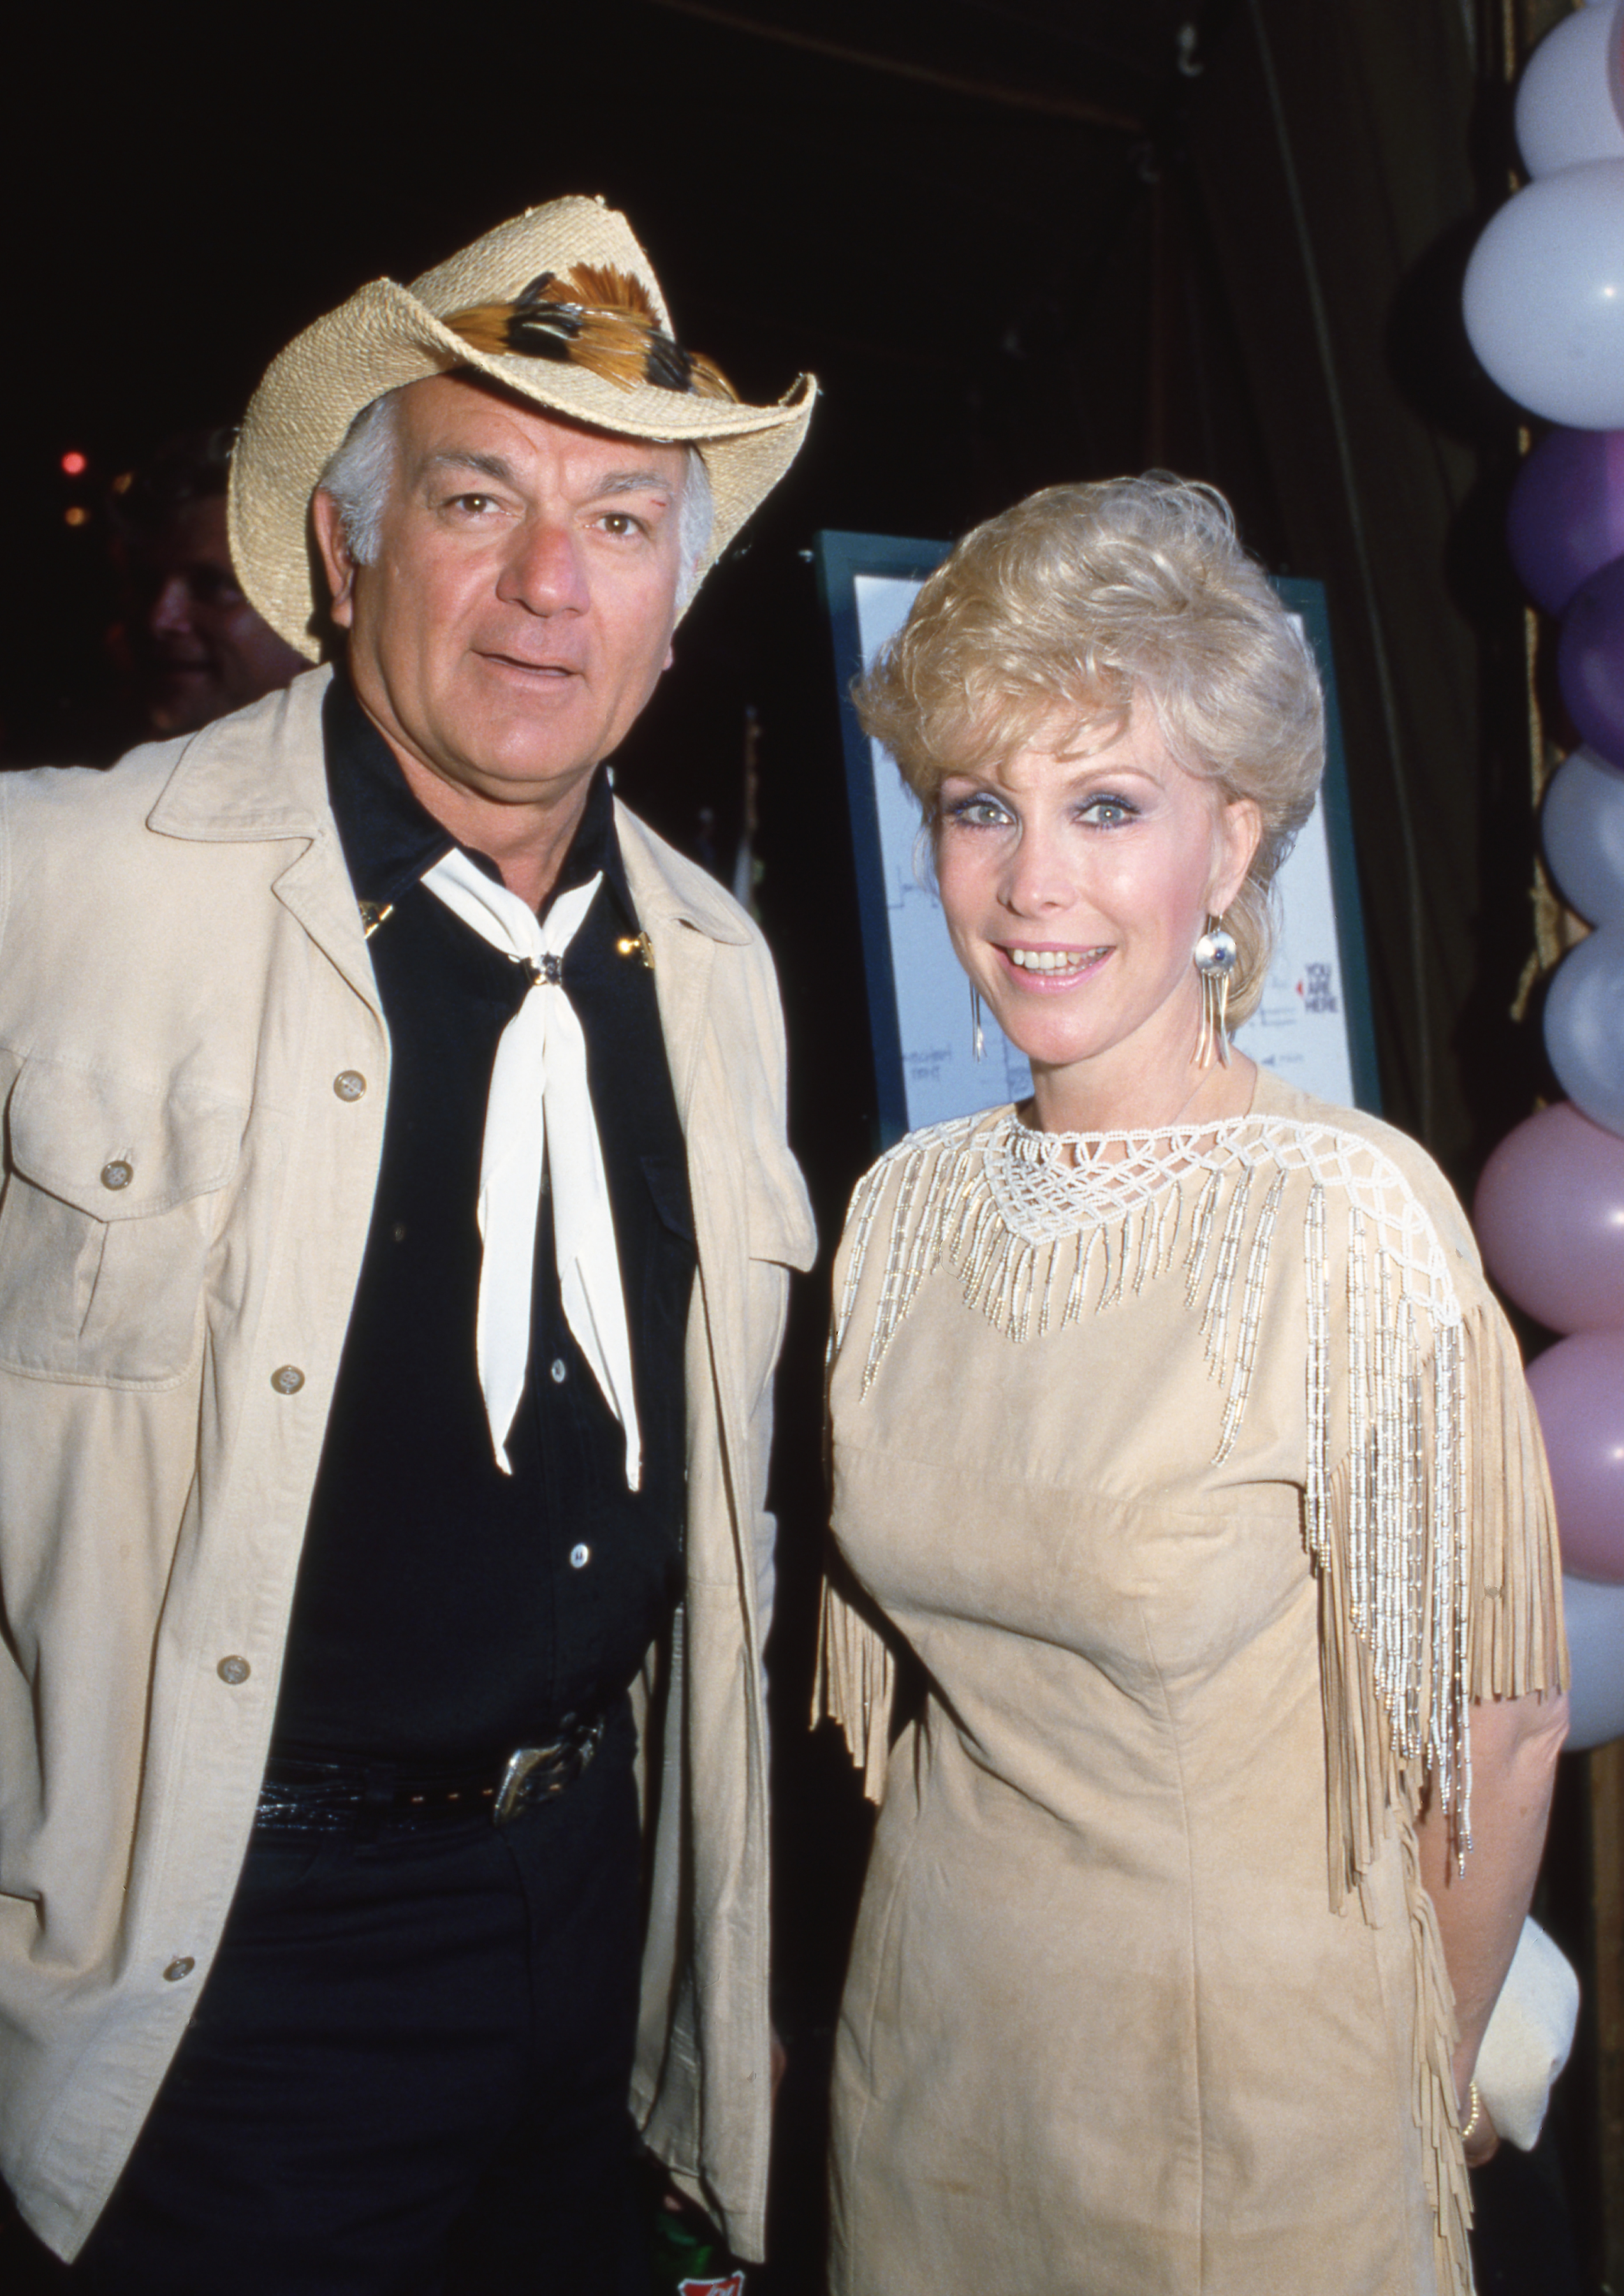 Barbara Eden wears a cream and white outfit beside Robert Mandan at a party in 1982. | Source: Getty Images